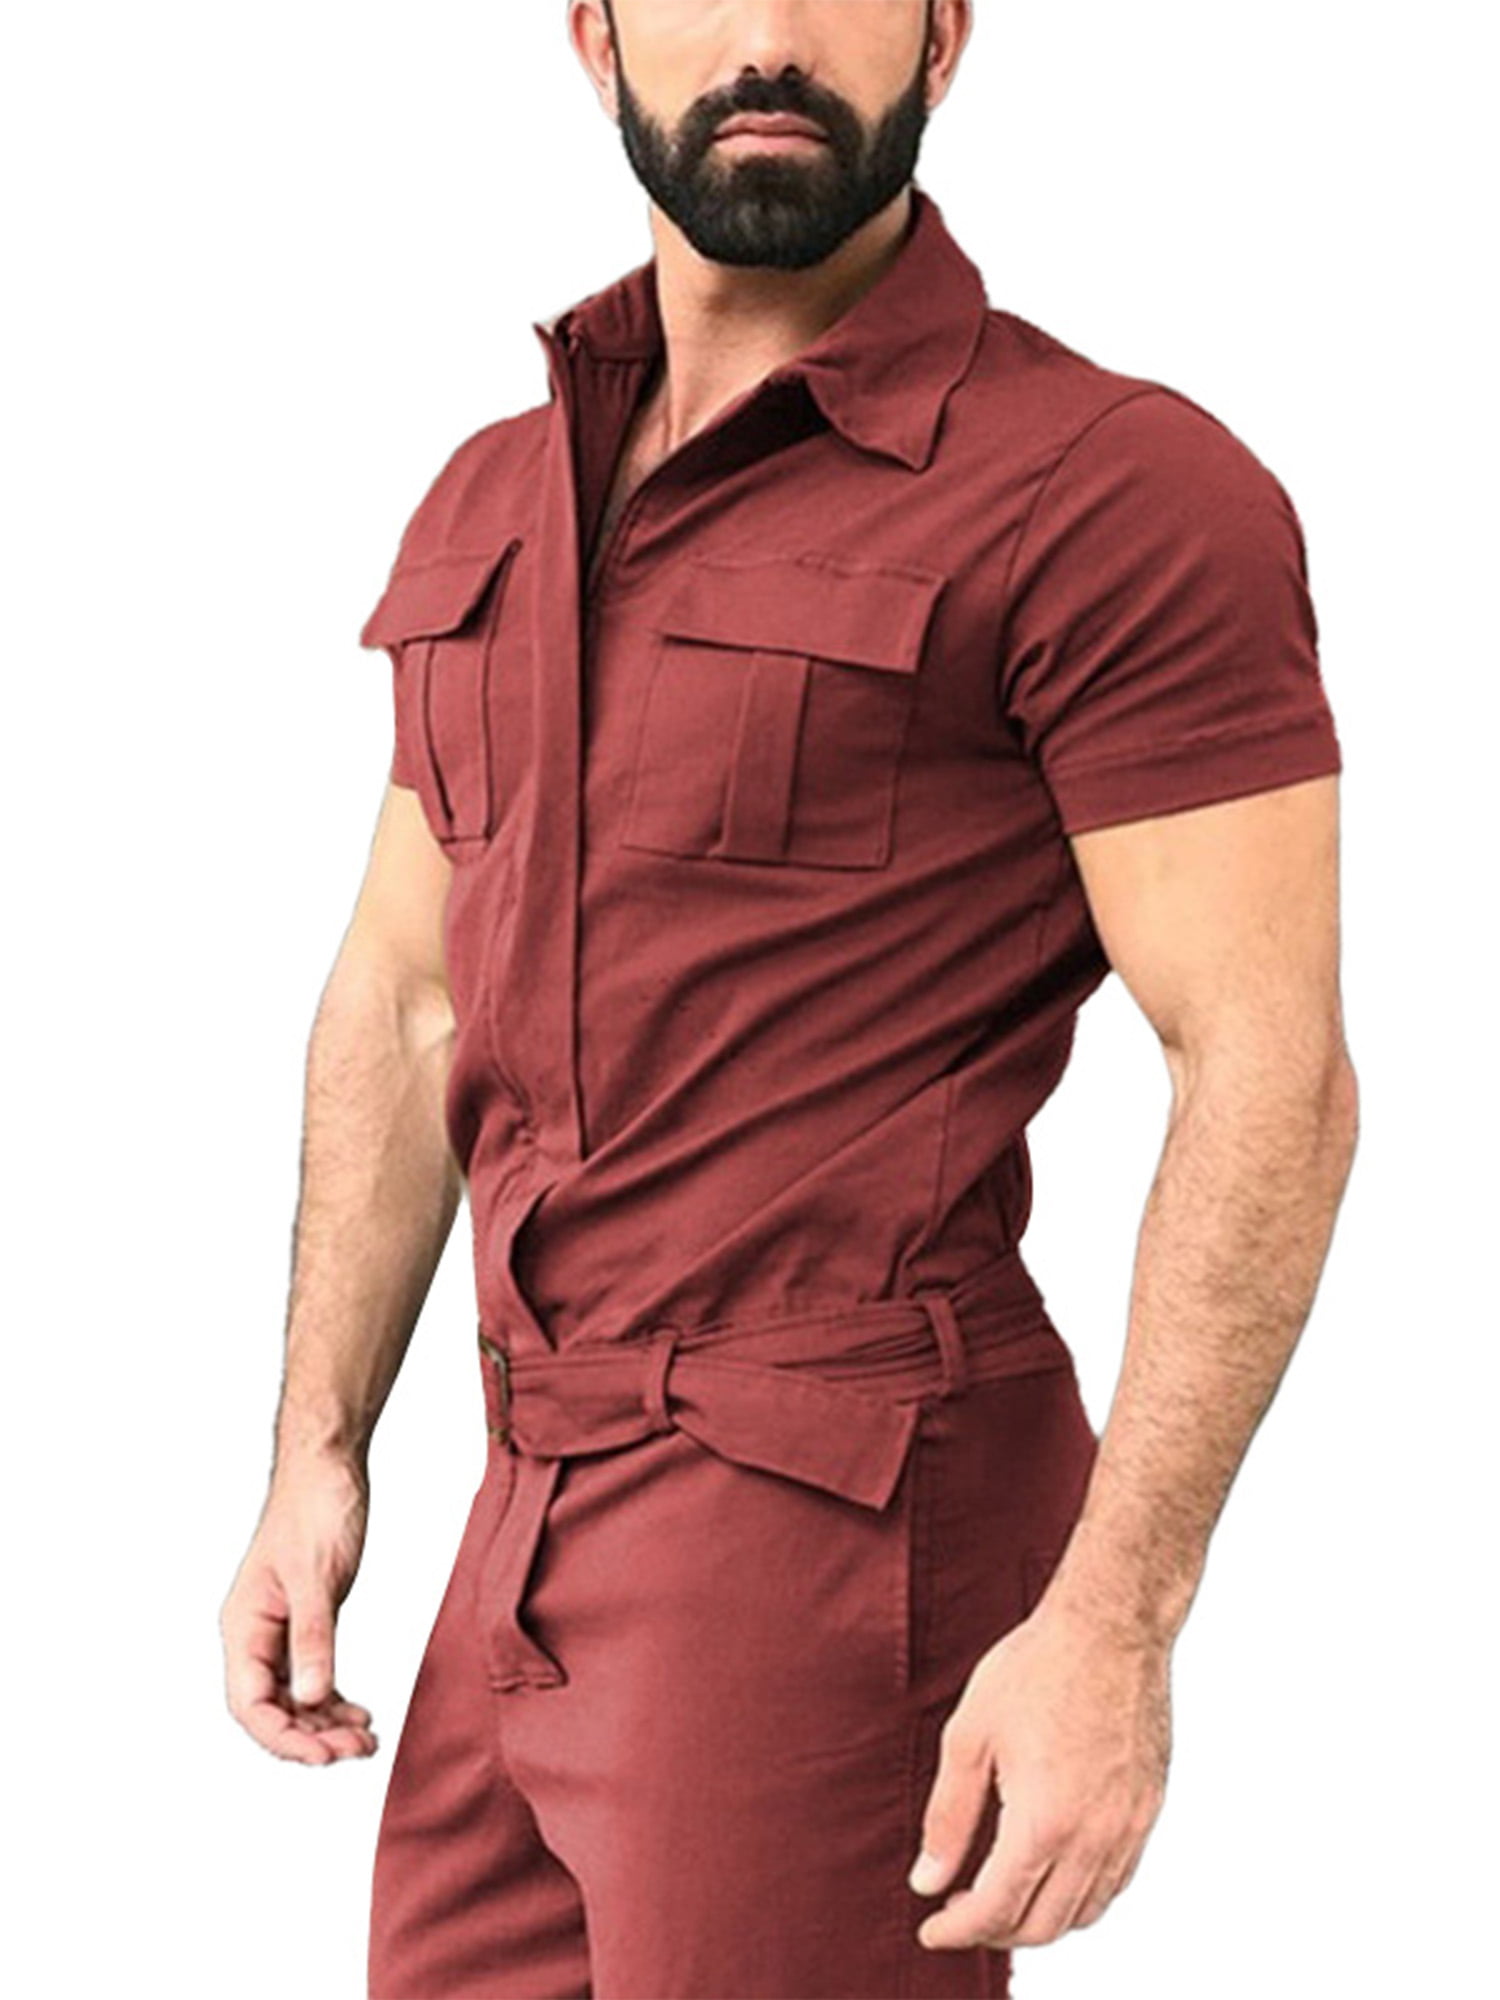 Men's One Piece Rompers Casual Zipper Short Tracksuits Coverall Playsuits with Pockets 